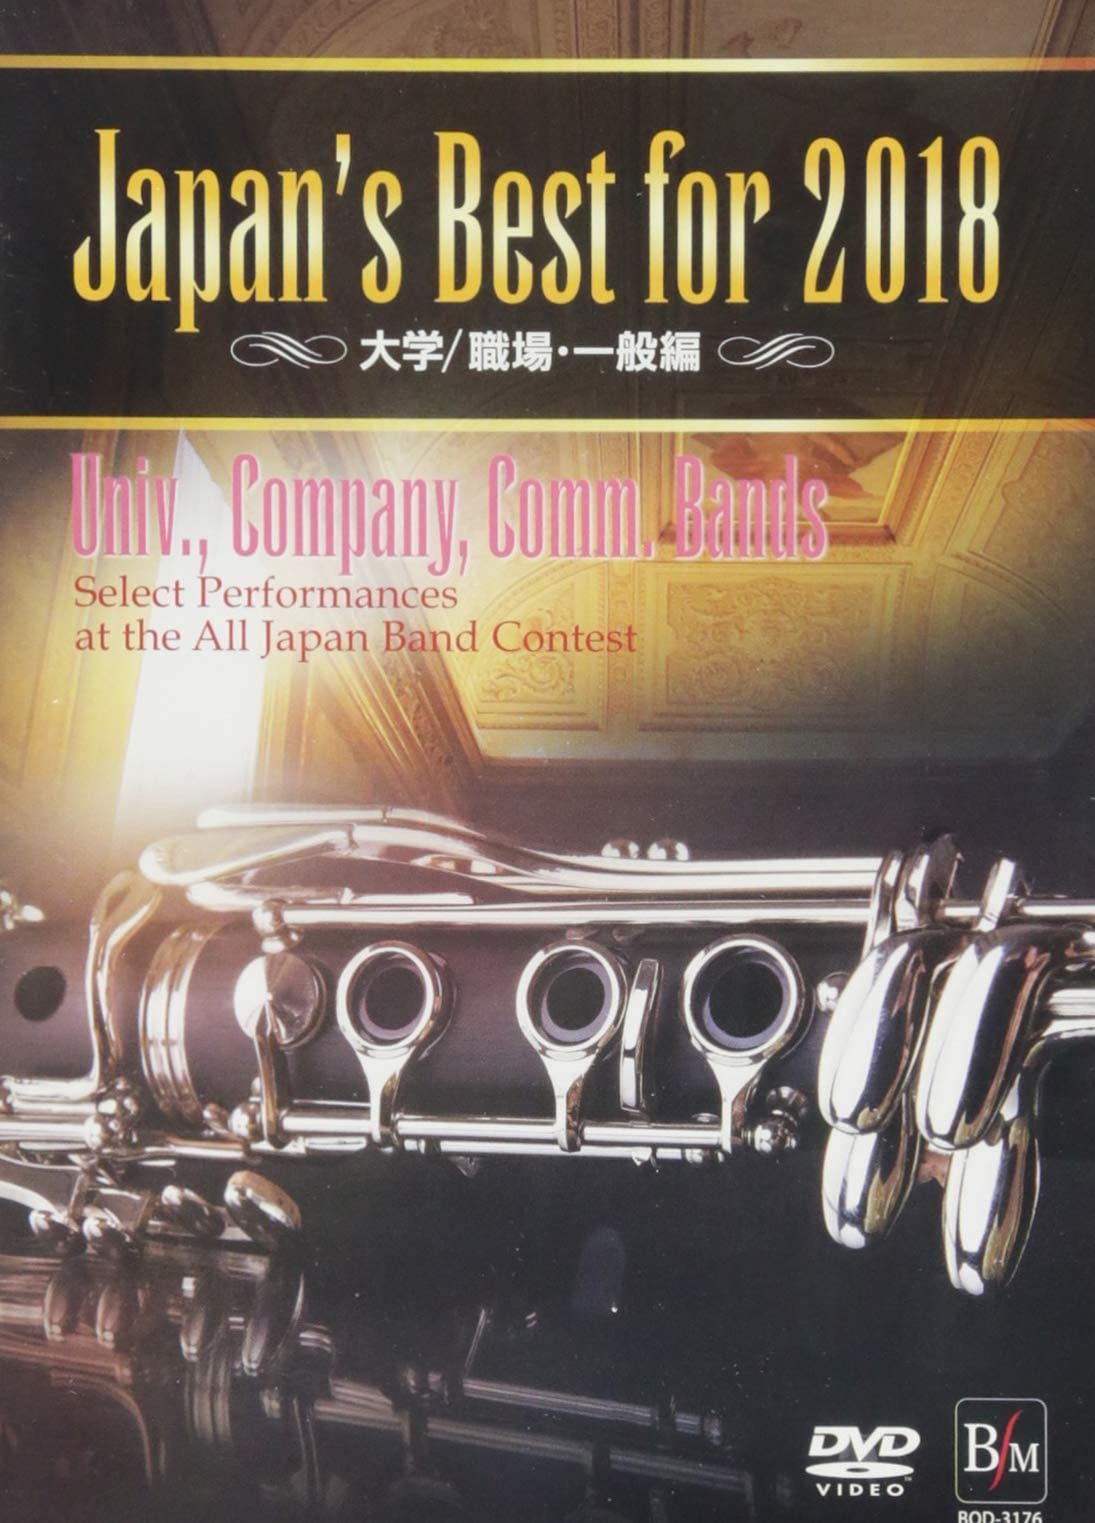 Japanfs Best for 2018 w/EEʕ [DVD]